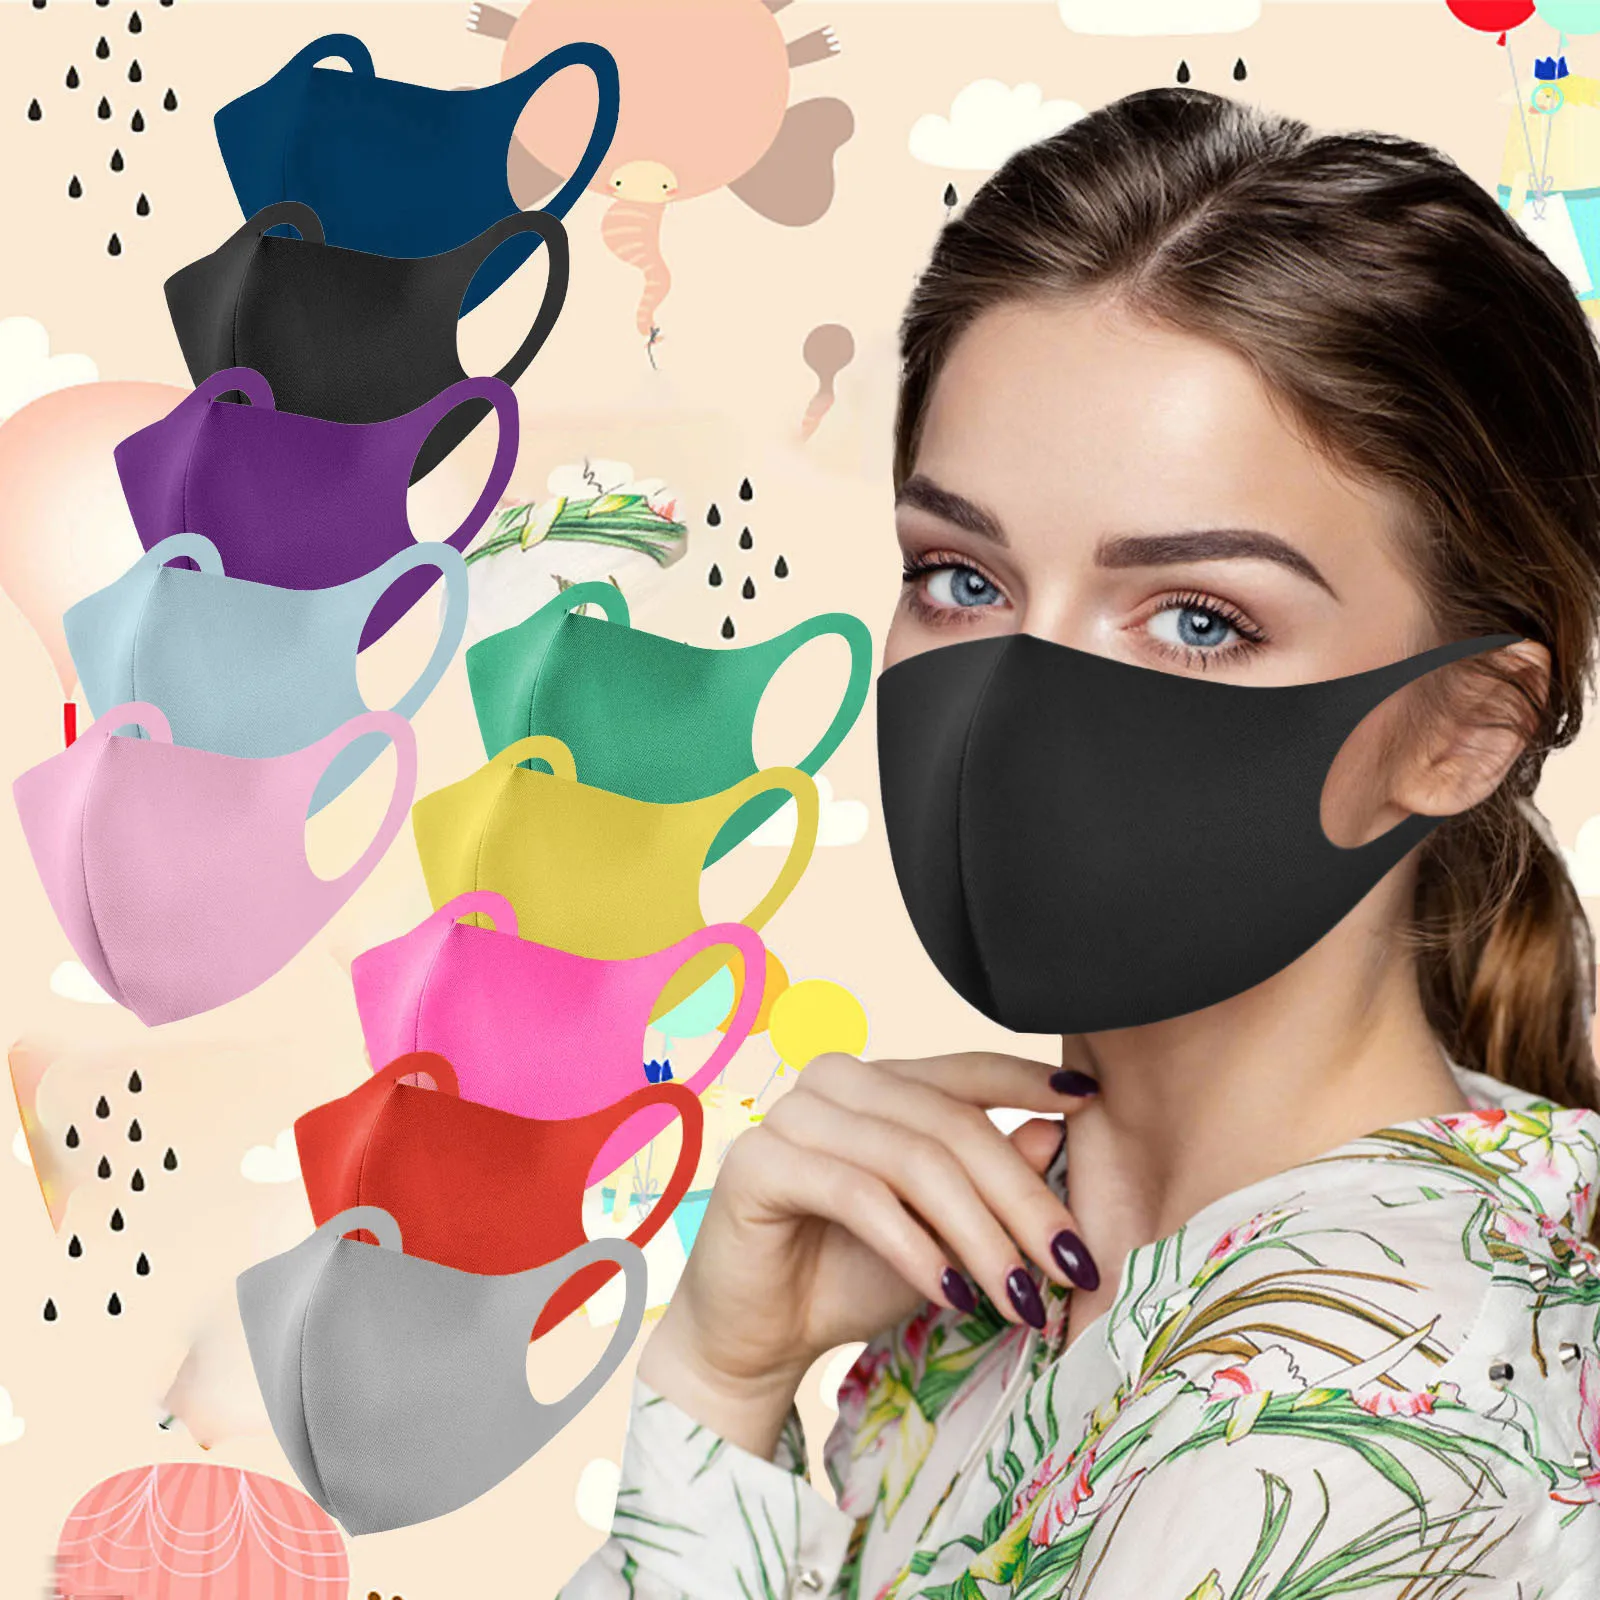 

20 Pcs Fashionable Mask With A Variety Of Color Options Adult'S Reusable Washable Face Mask Carbon Filter Odorless Comfort Mask